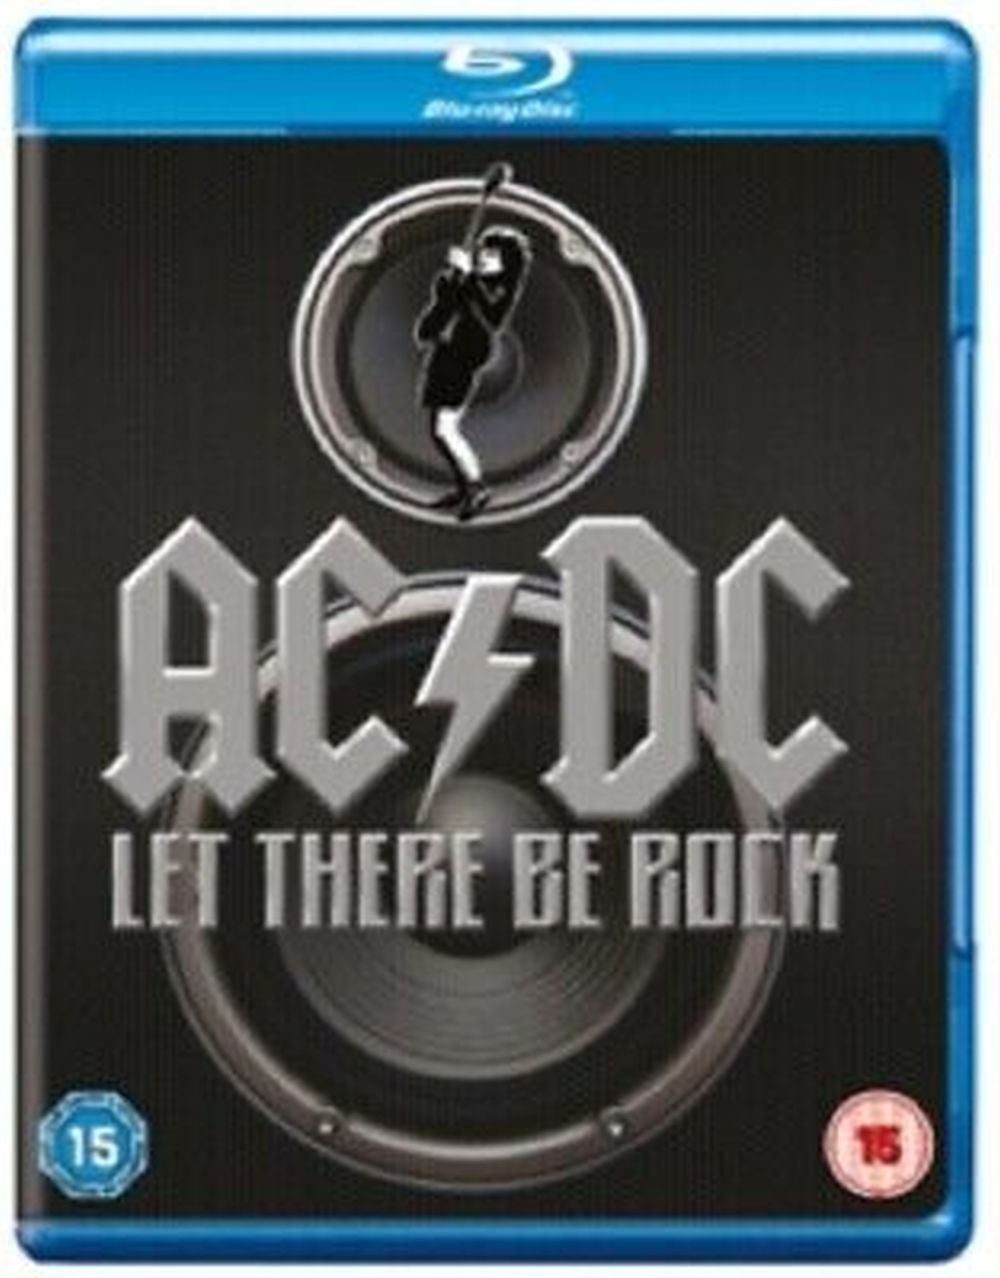 ACDC - Let There Be Rock (RB) - Blu-Ray - Music